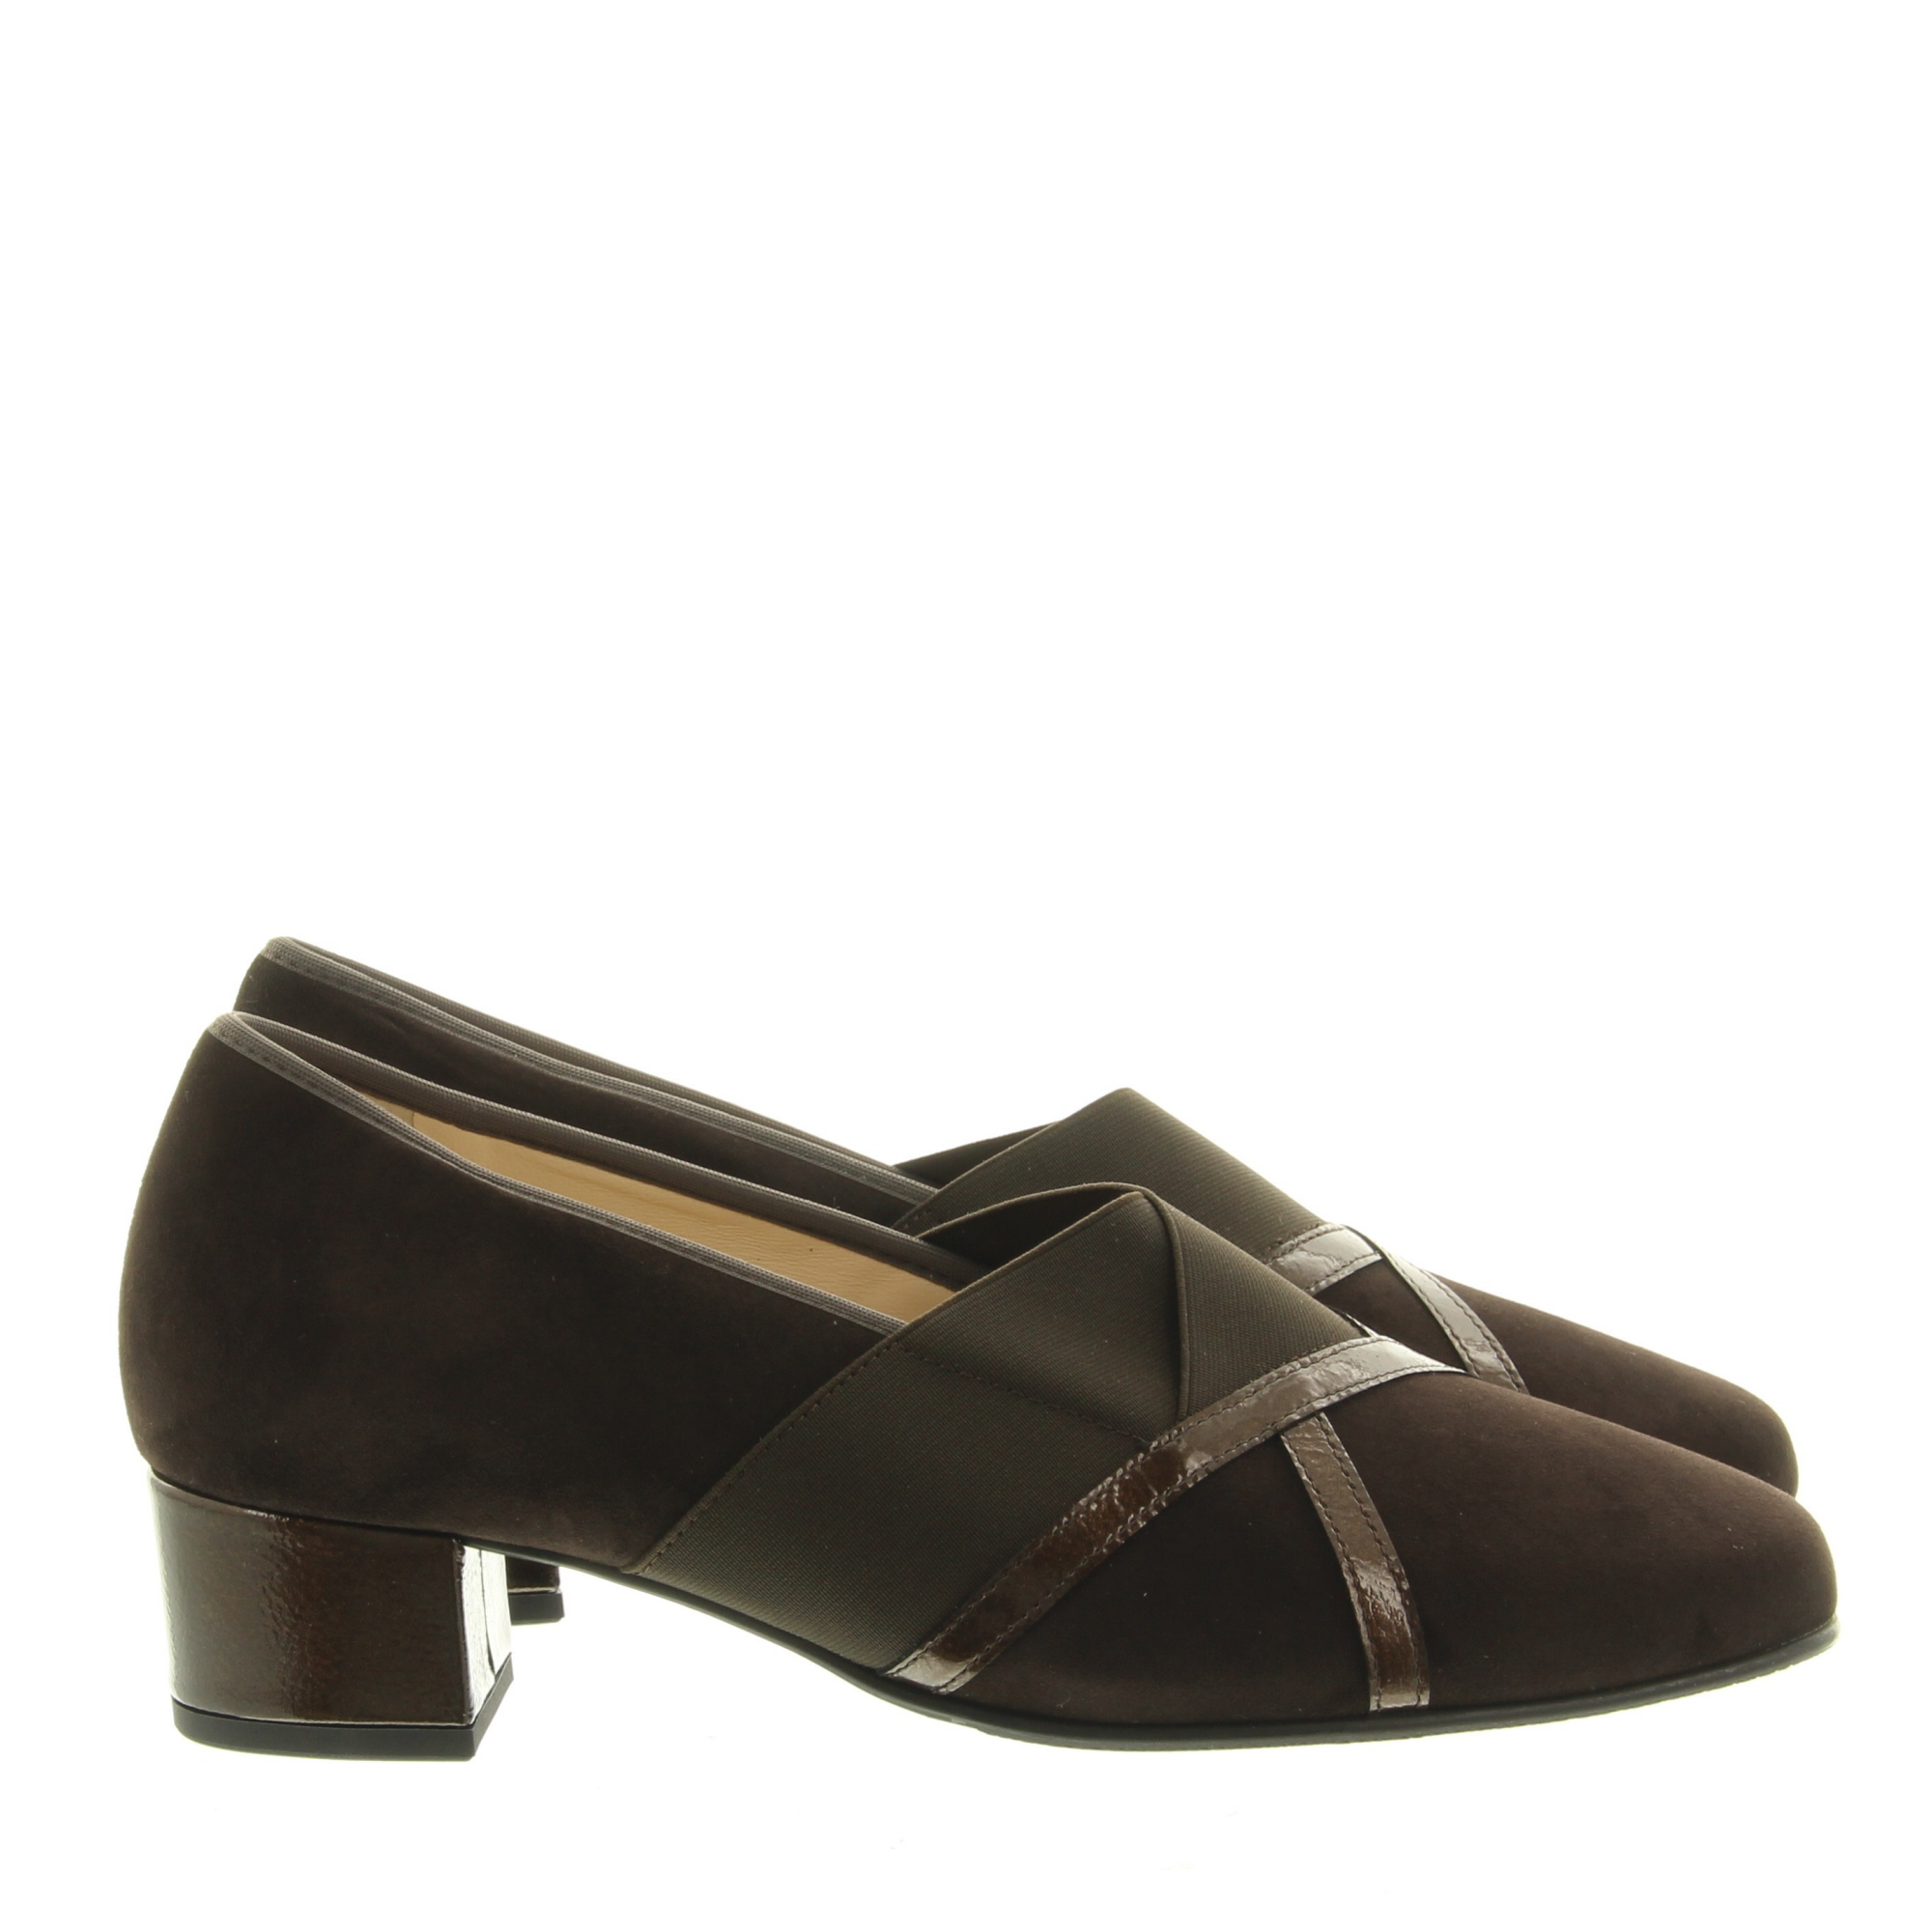 Hassia Shoes 303335 Evelyn 8600 Darkbrown